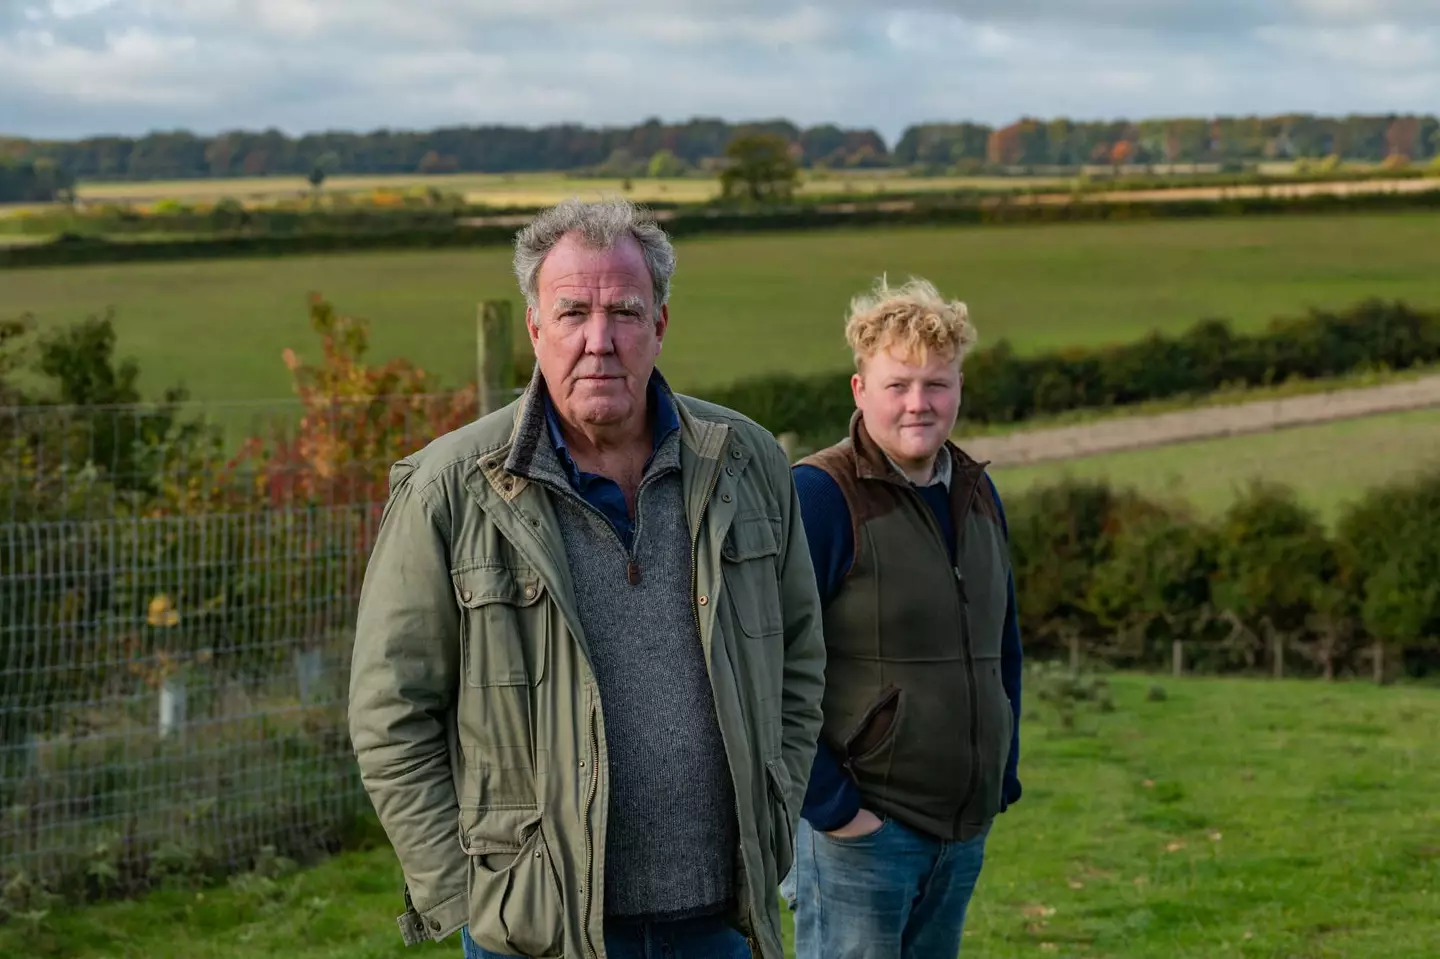 The future of Clarkson's Farm has been in doubt.